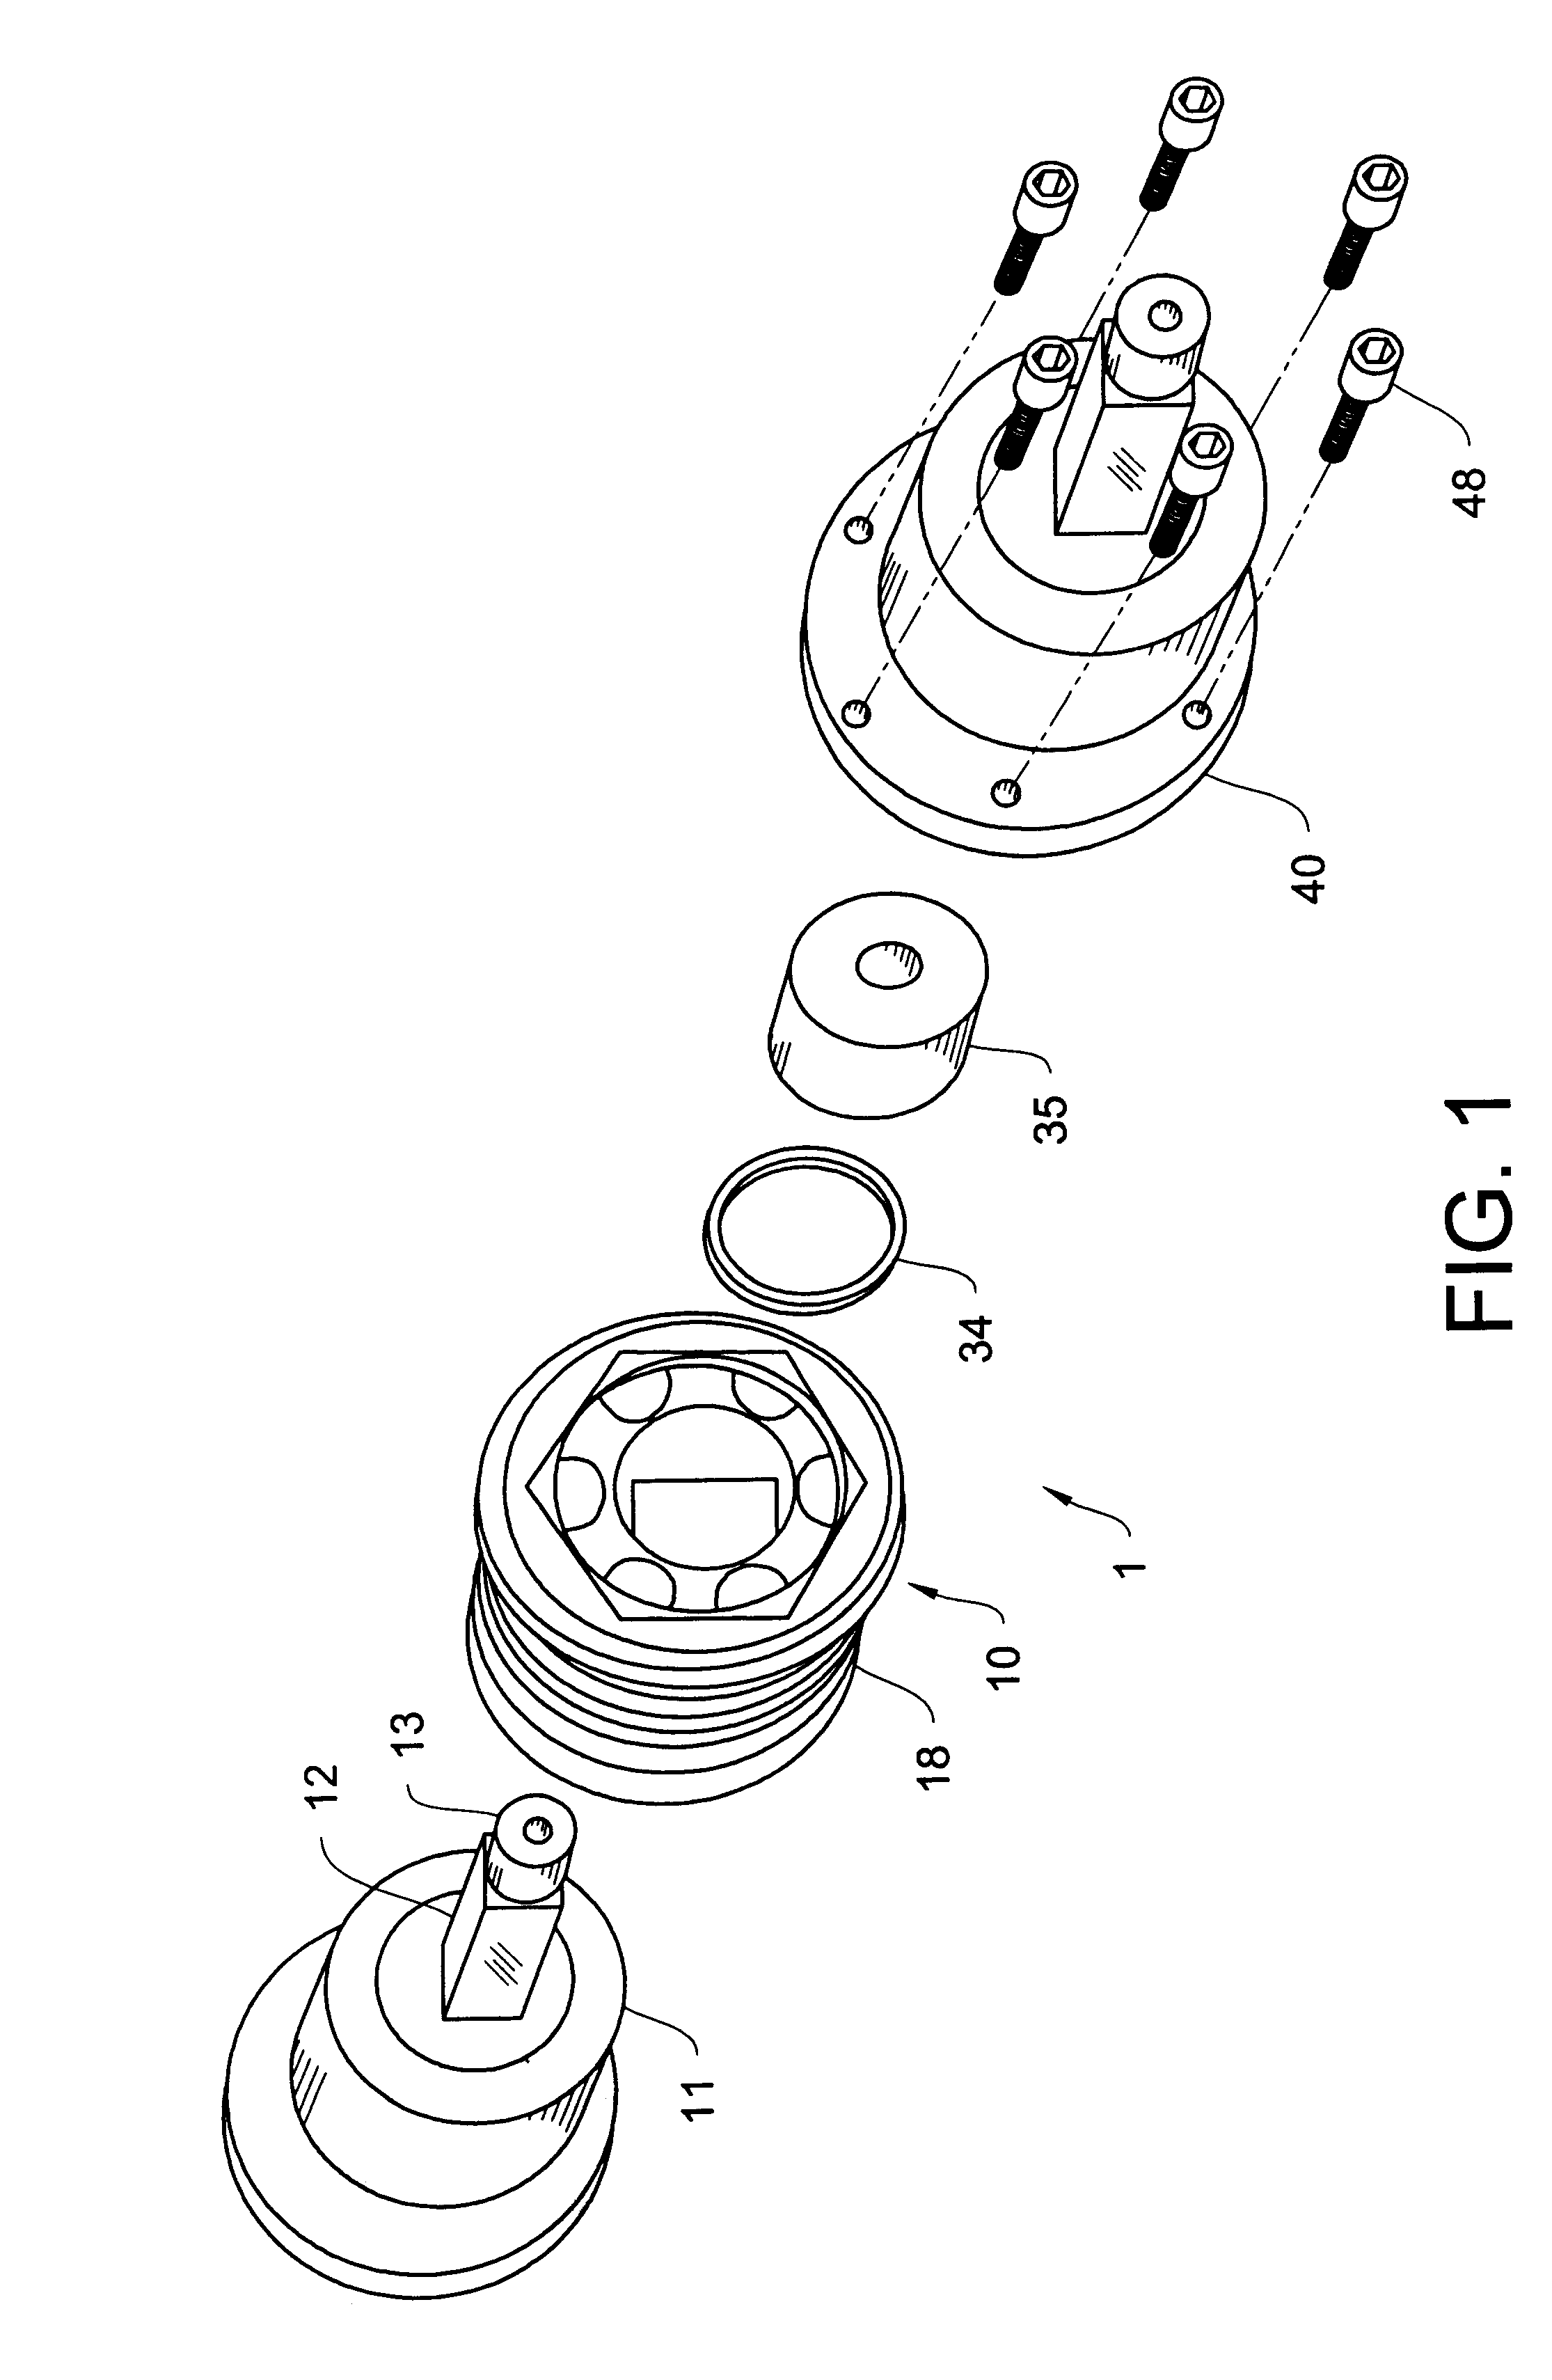 Constant velocity universal joint for therapy devices